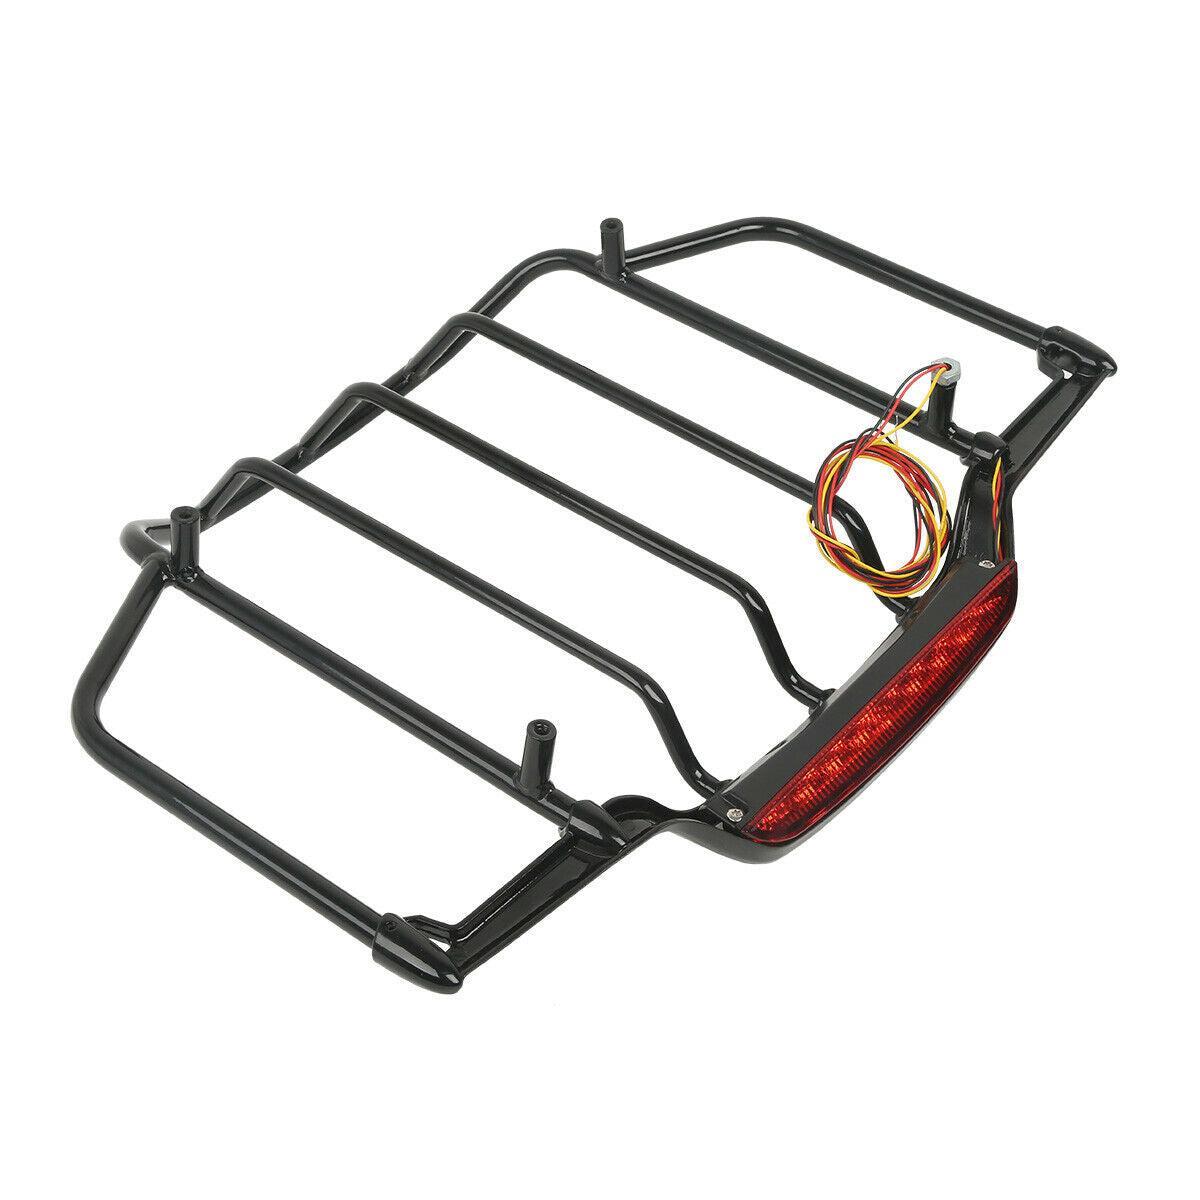 LED Light Air Wing Top Luggage Rack Fit For Harley Touring Road King Glide 14-22 - Moto Life Products